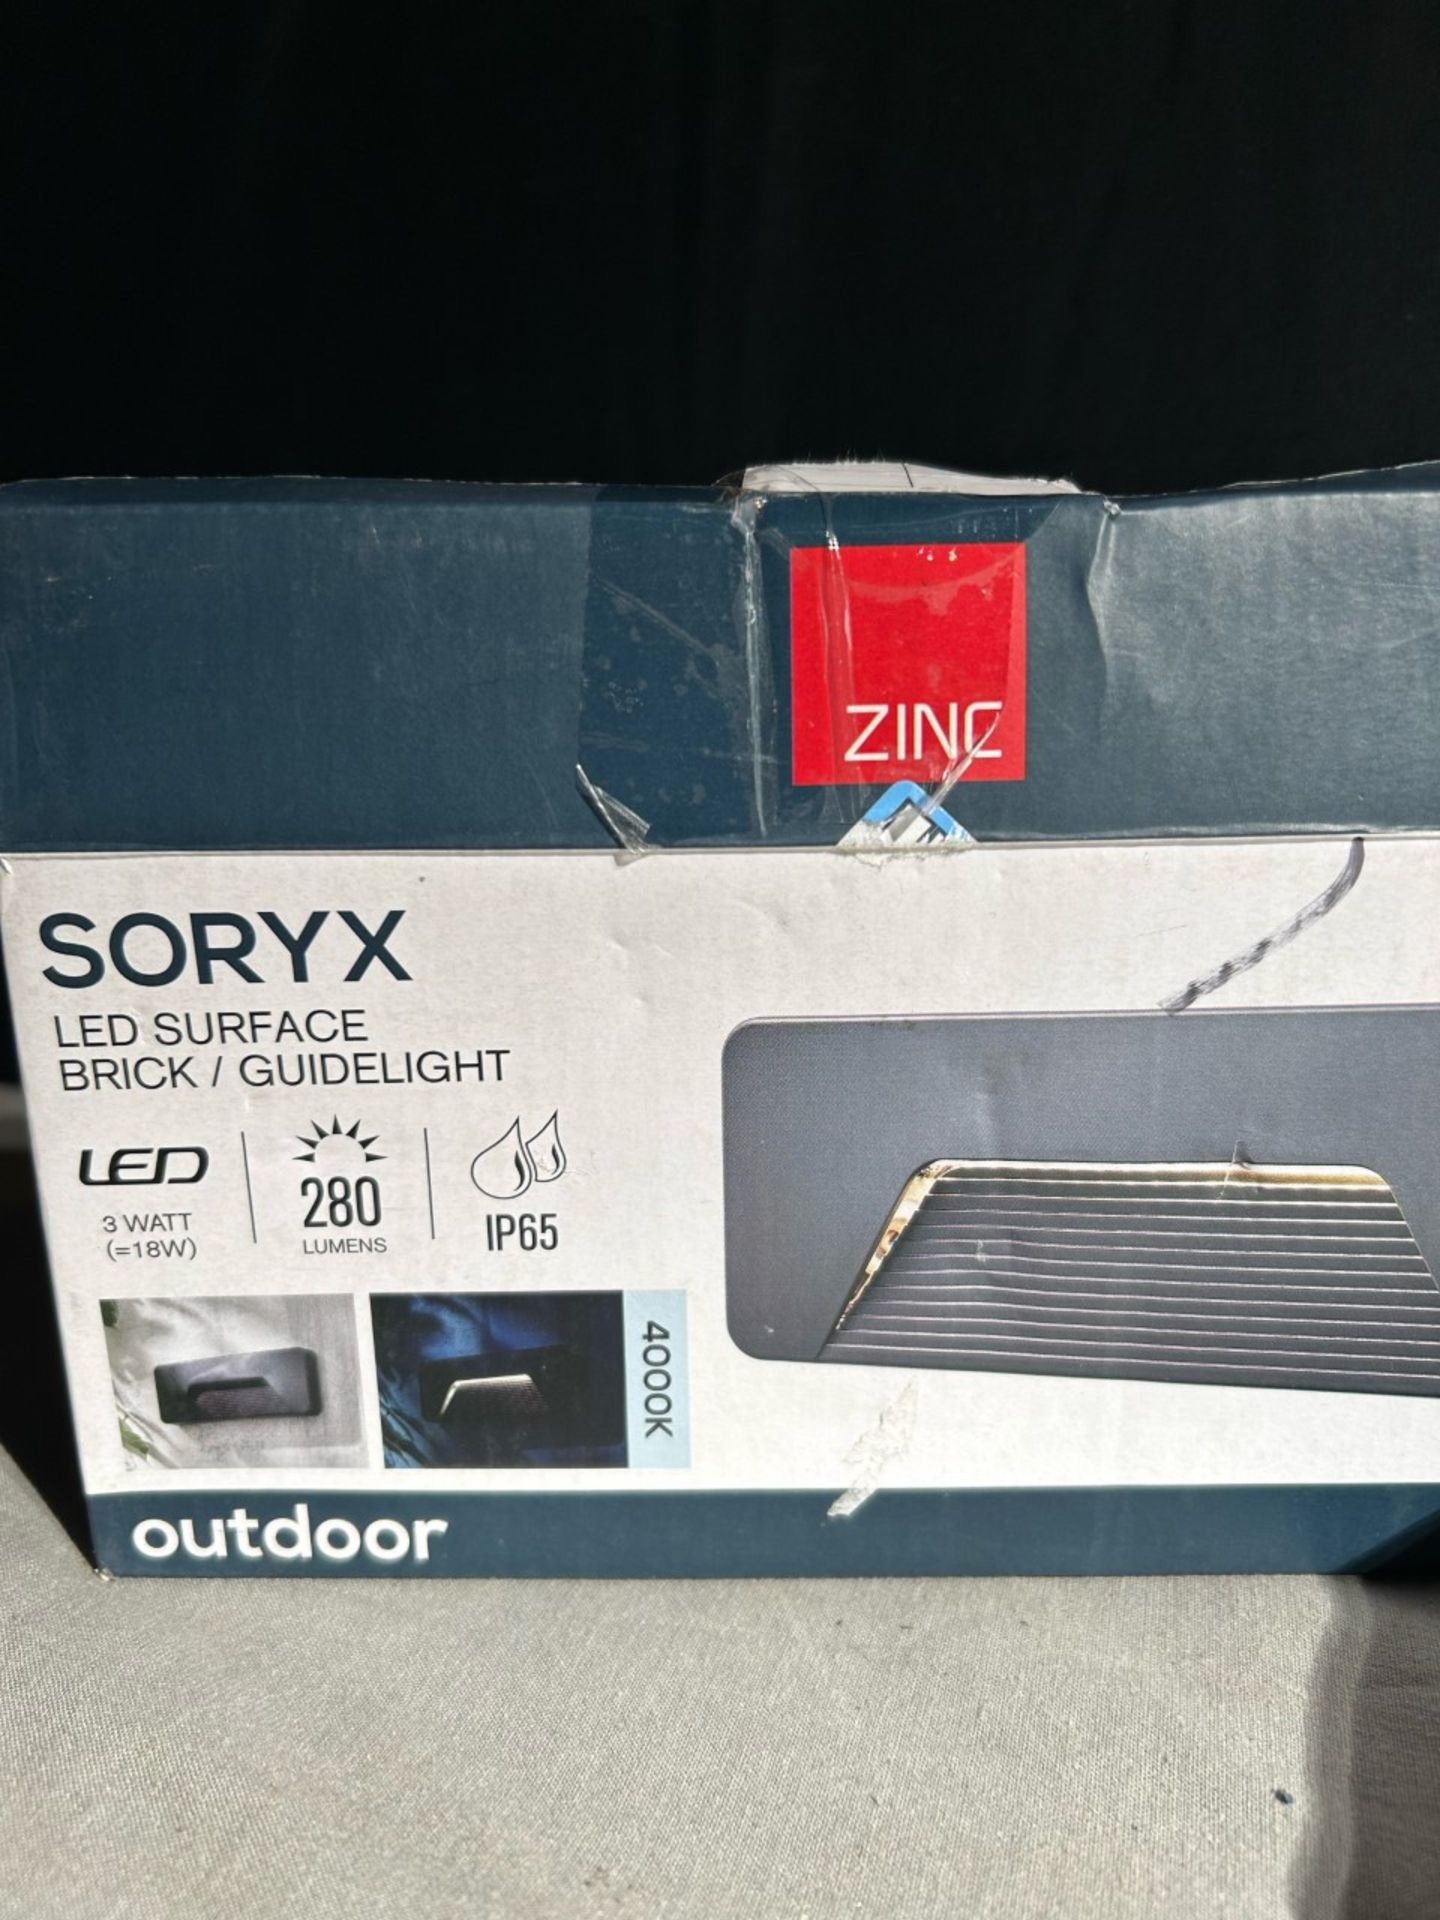 Zinc Soryx LED surface brick/ guide light. Matt anthracite charcoal colour. New in box - Image 3 of 3